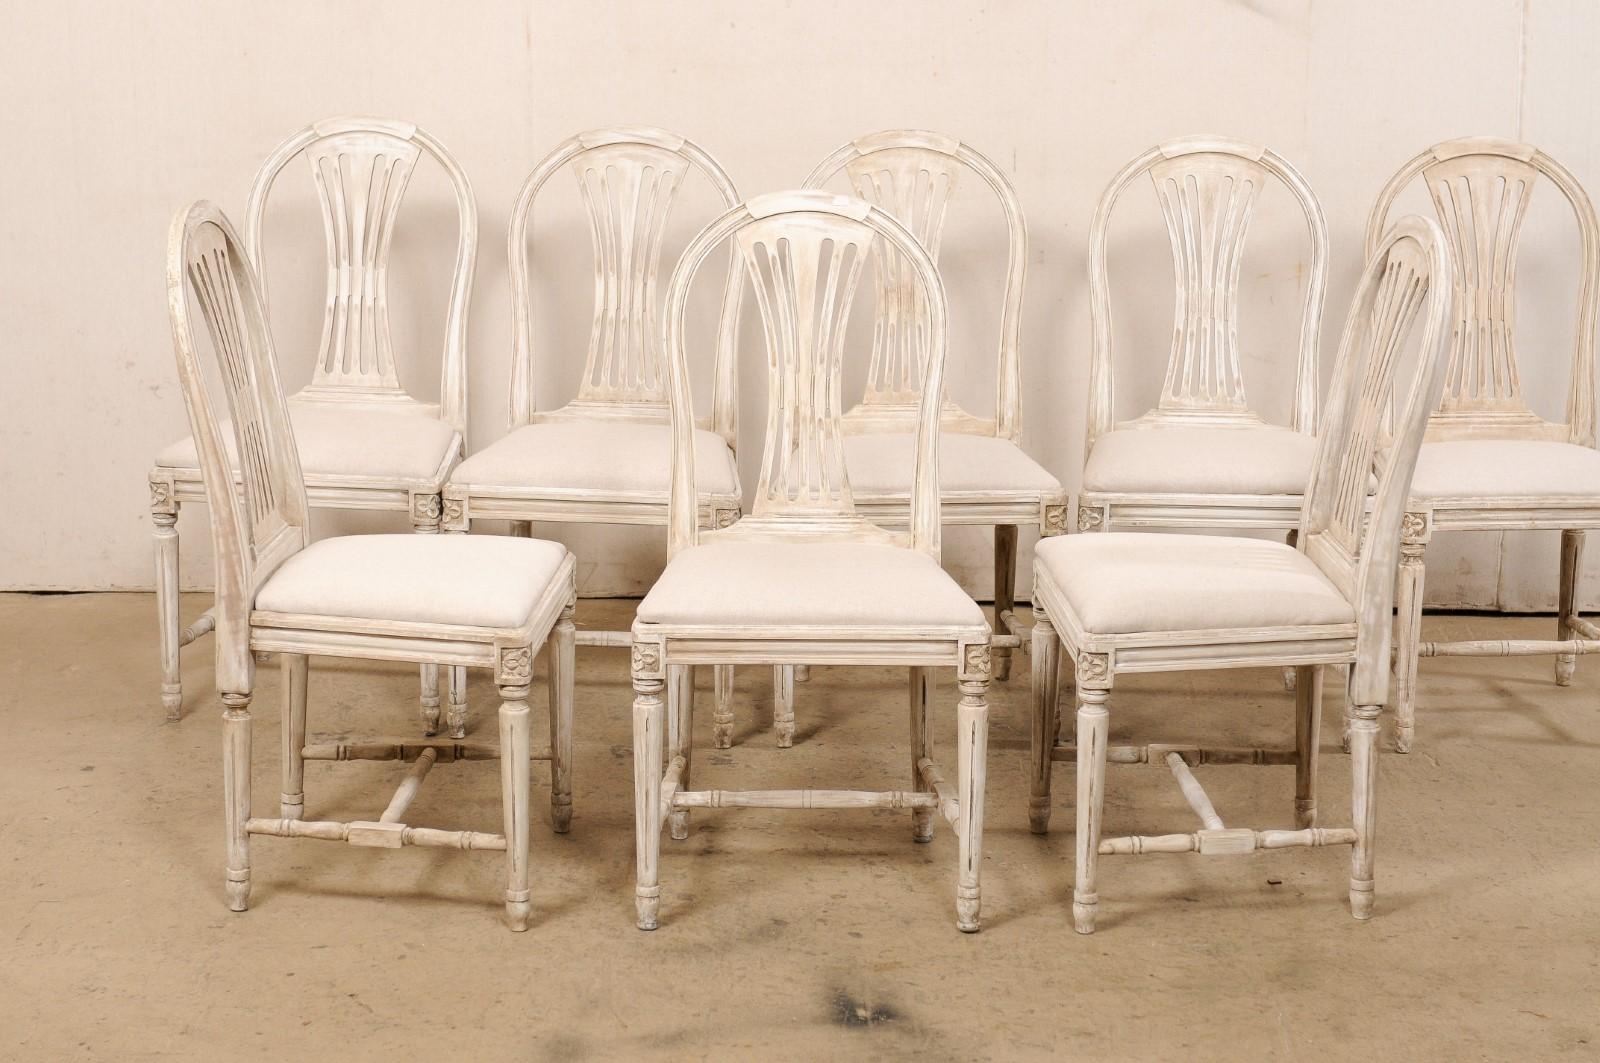 A Swedish Gustavian-style set of eight armchairs, with newly upholstered seats, from the mid 20th century. These mid-century chairs from Sweden each feature nicely curved top rails with pierced-splat backs (which take the form of the wheat-style